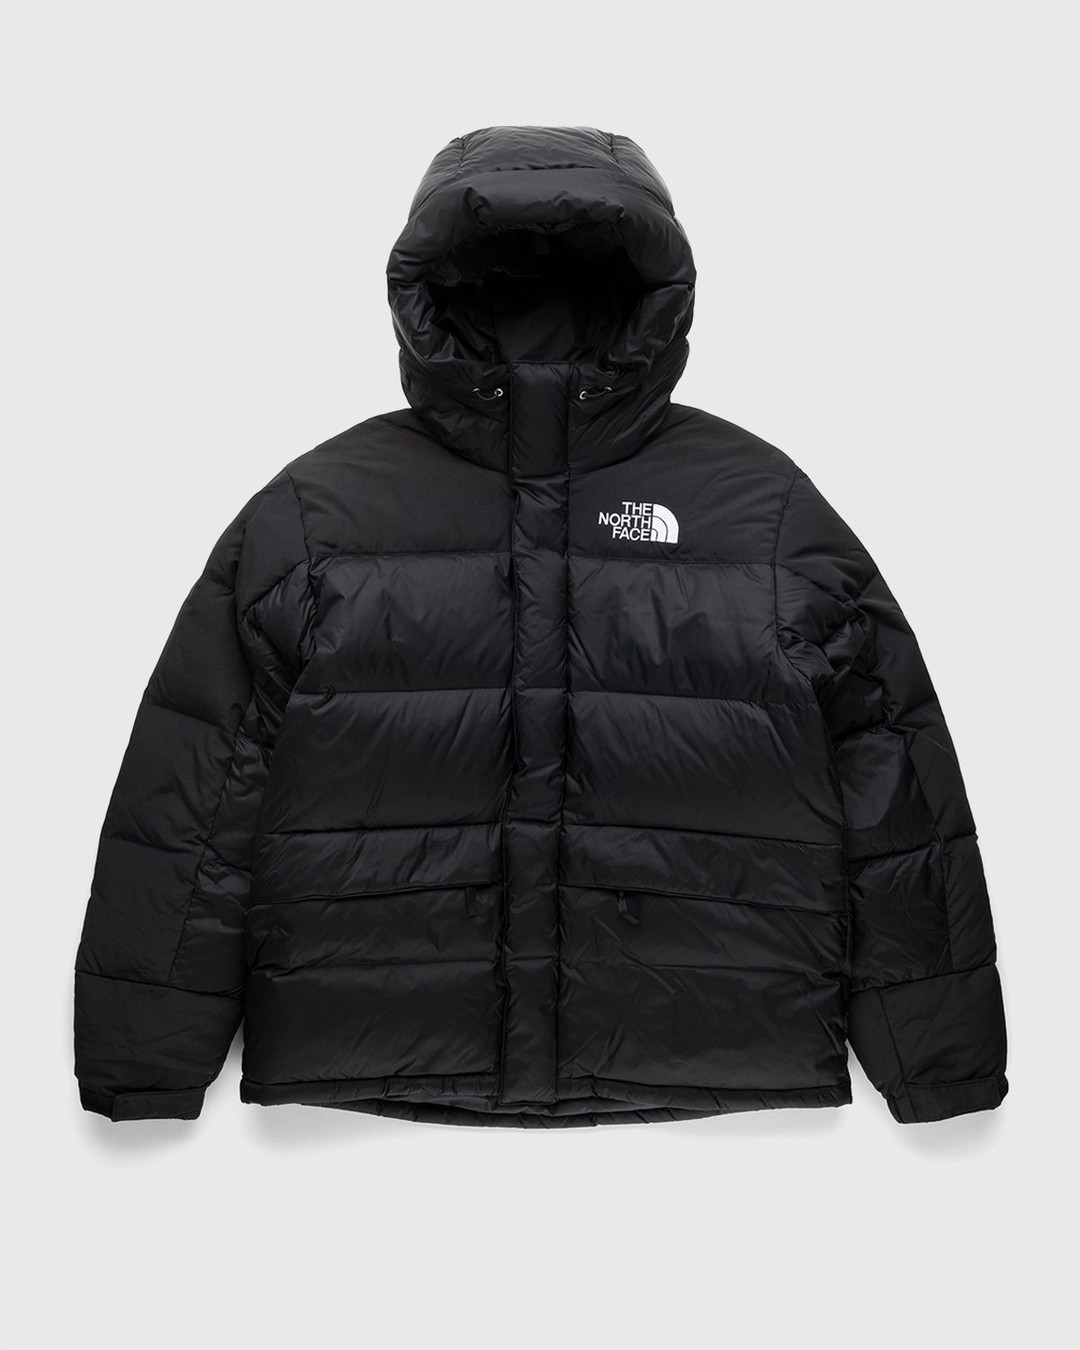 The North Face – Himalayan Down | Highsnobiety Shop